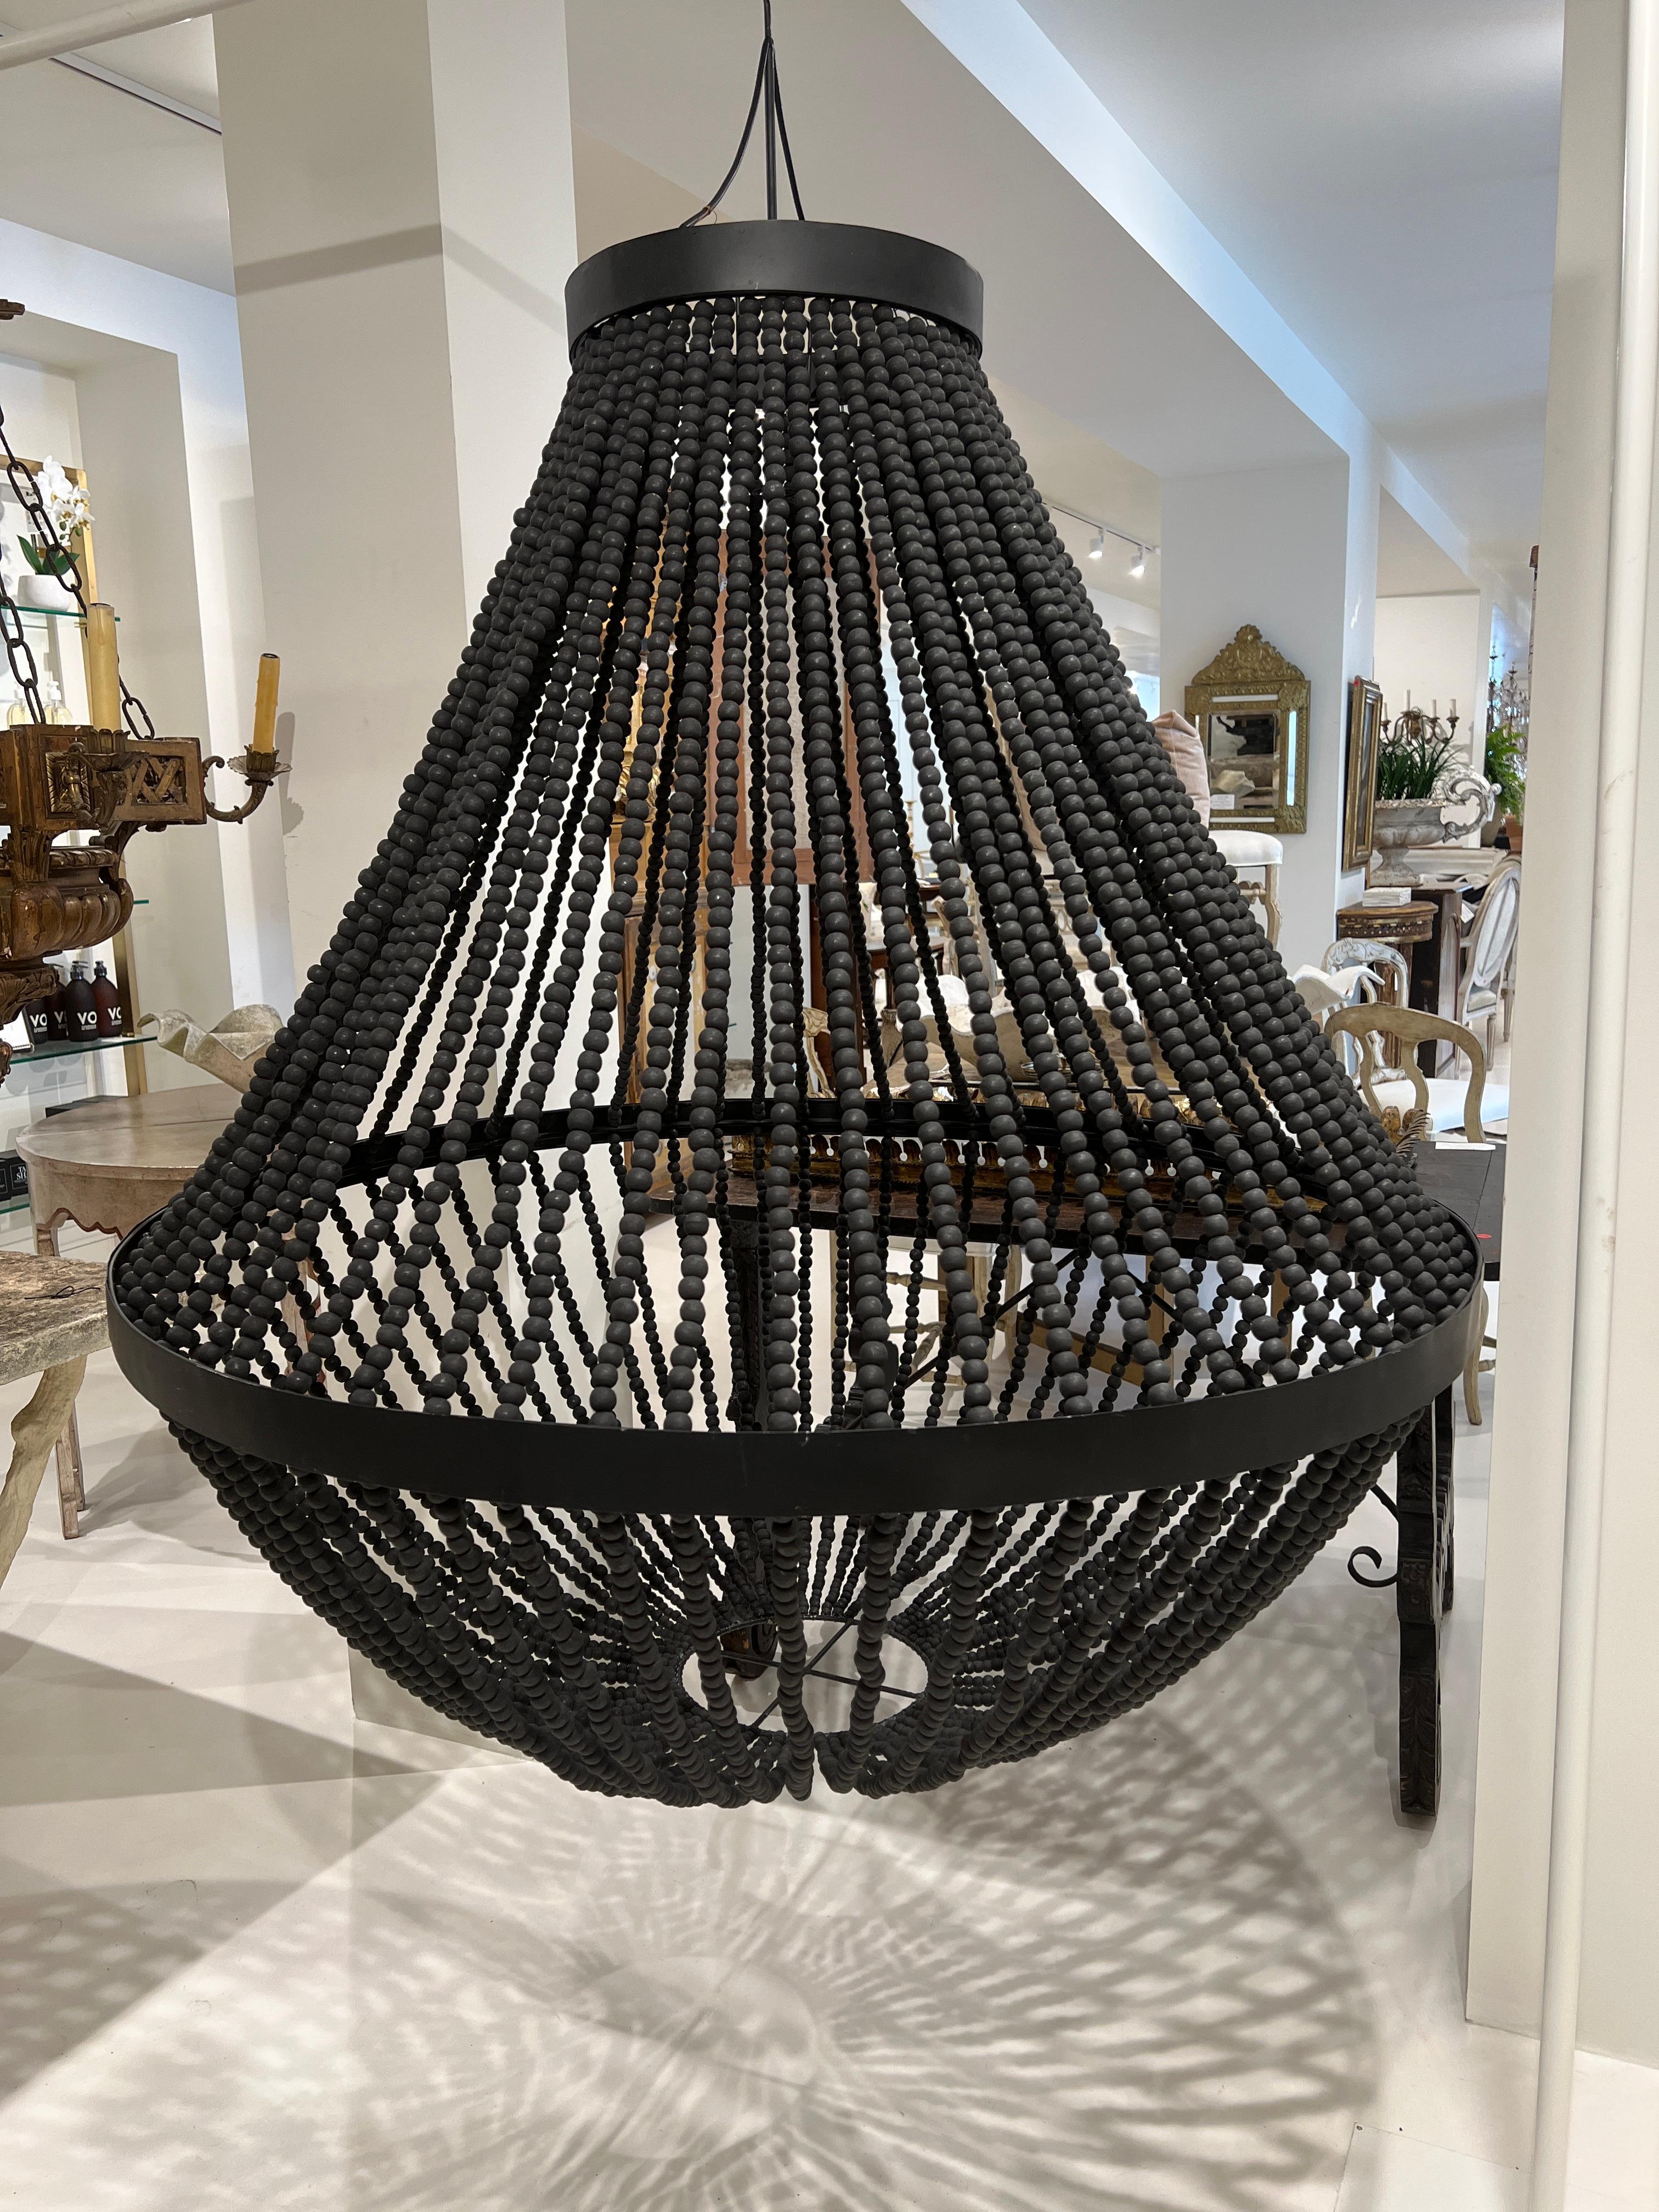 When size matters, this magnificent chandelier will wow. Completely matte black and designed with the upmost simplicity. This is a shade only. A lighting element would need to be added.